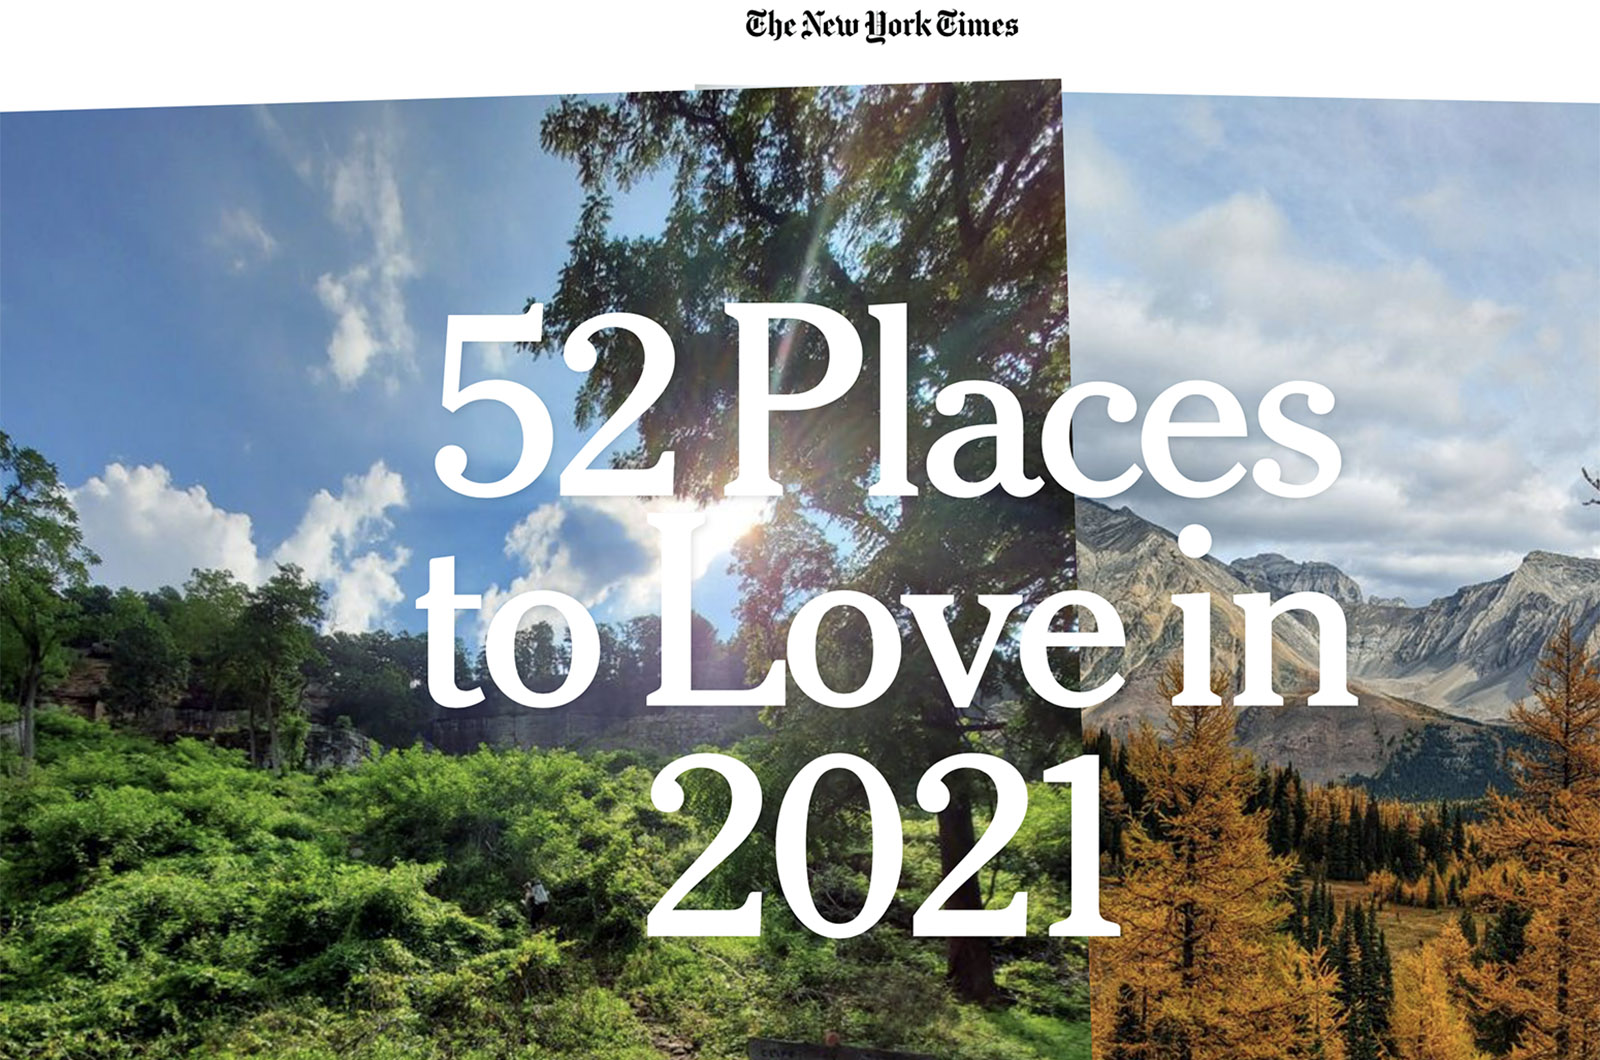 52-places-to-love-the-new-york-times-.jpg 